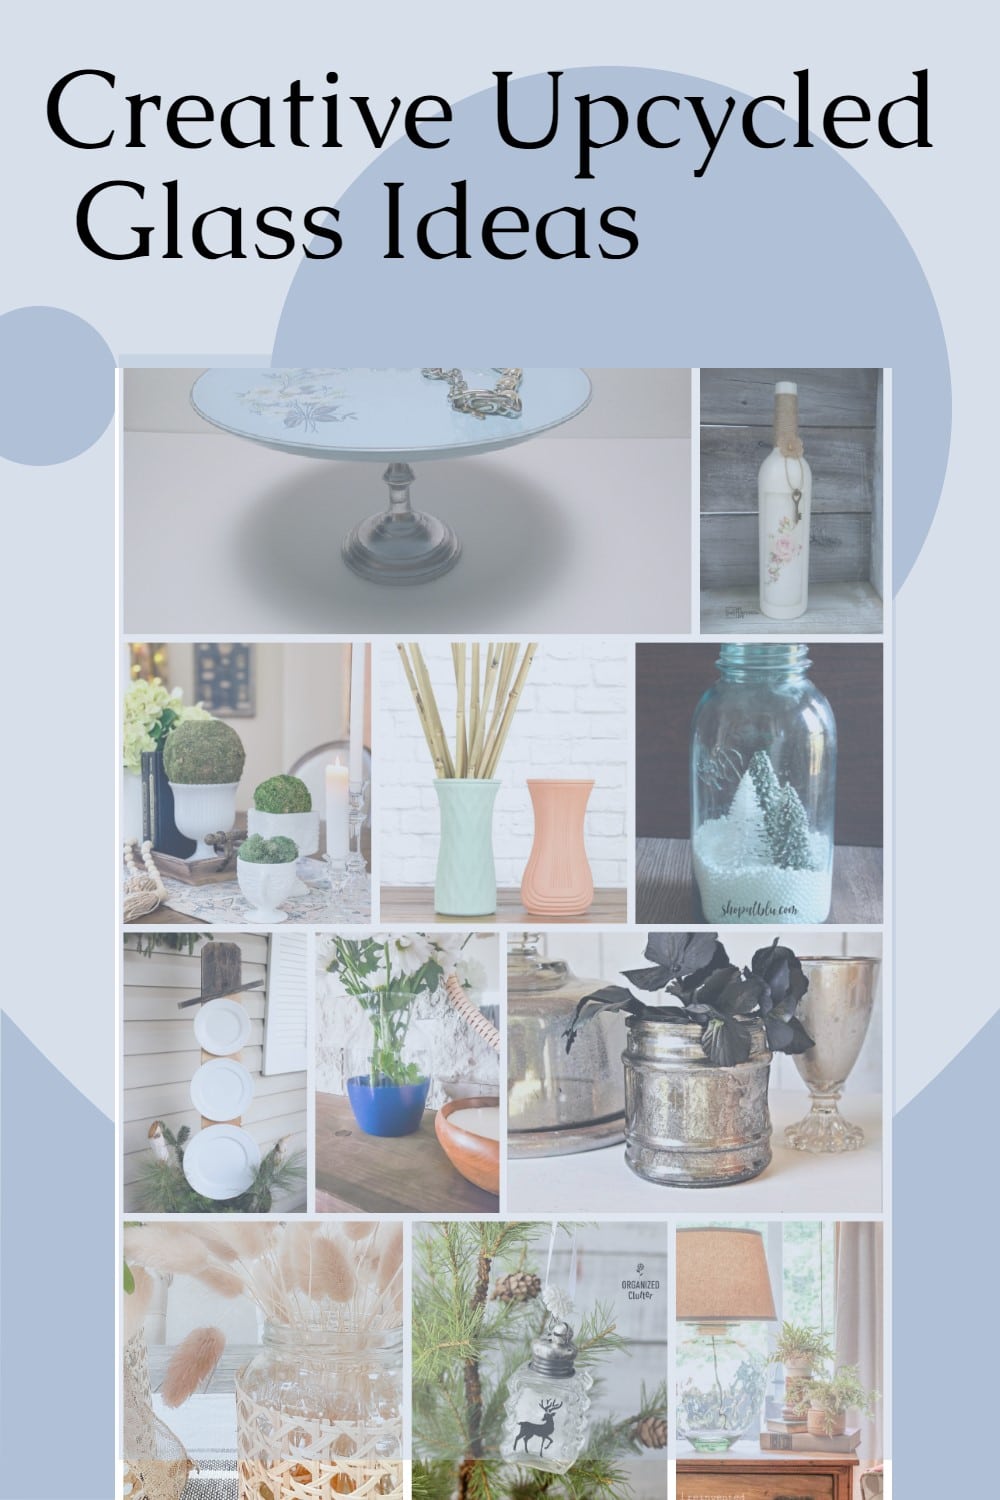 This end of year collection of thrift store projects will inspire you to change up some decor today. A collection of glass projects, plus 100 other ideas. #MyRepurposedLife #upcycle #repurpose #thriftstore via @repurposedlife